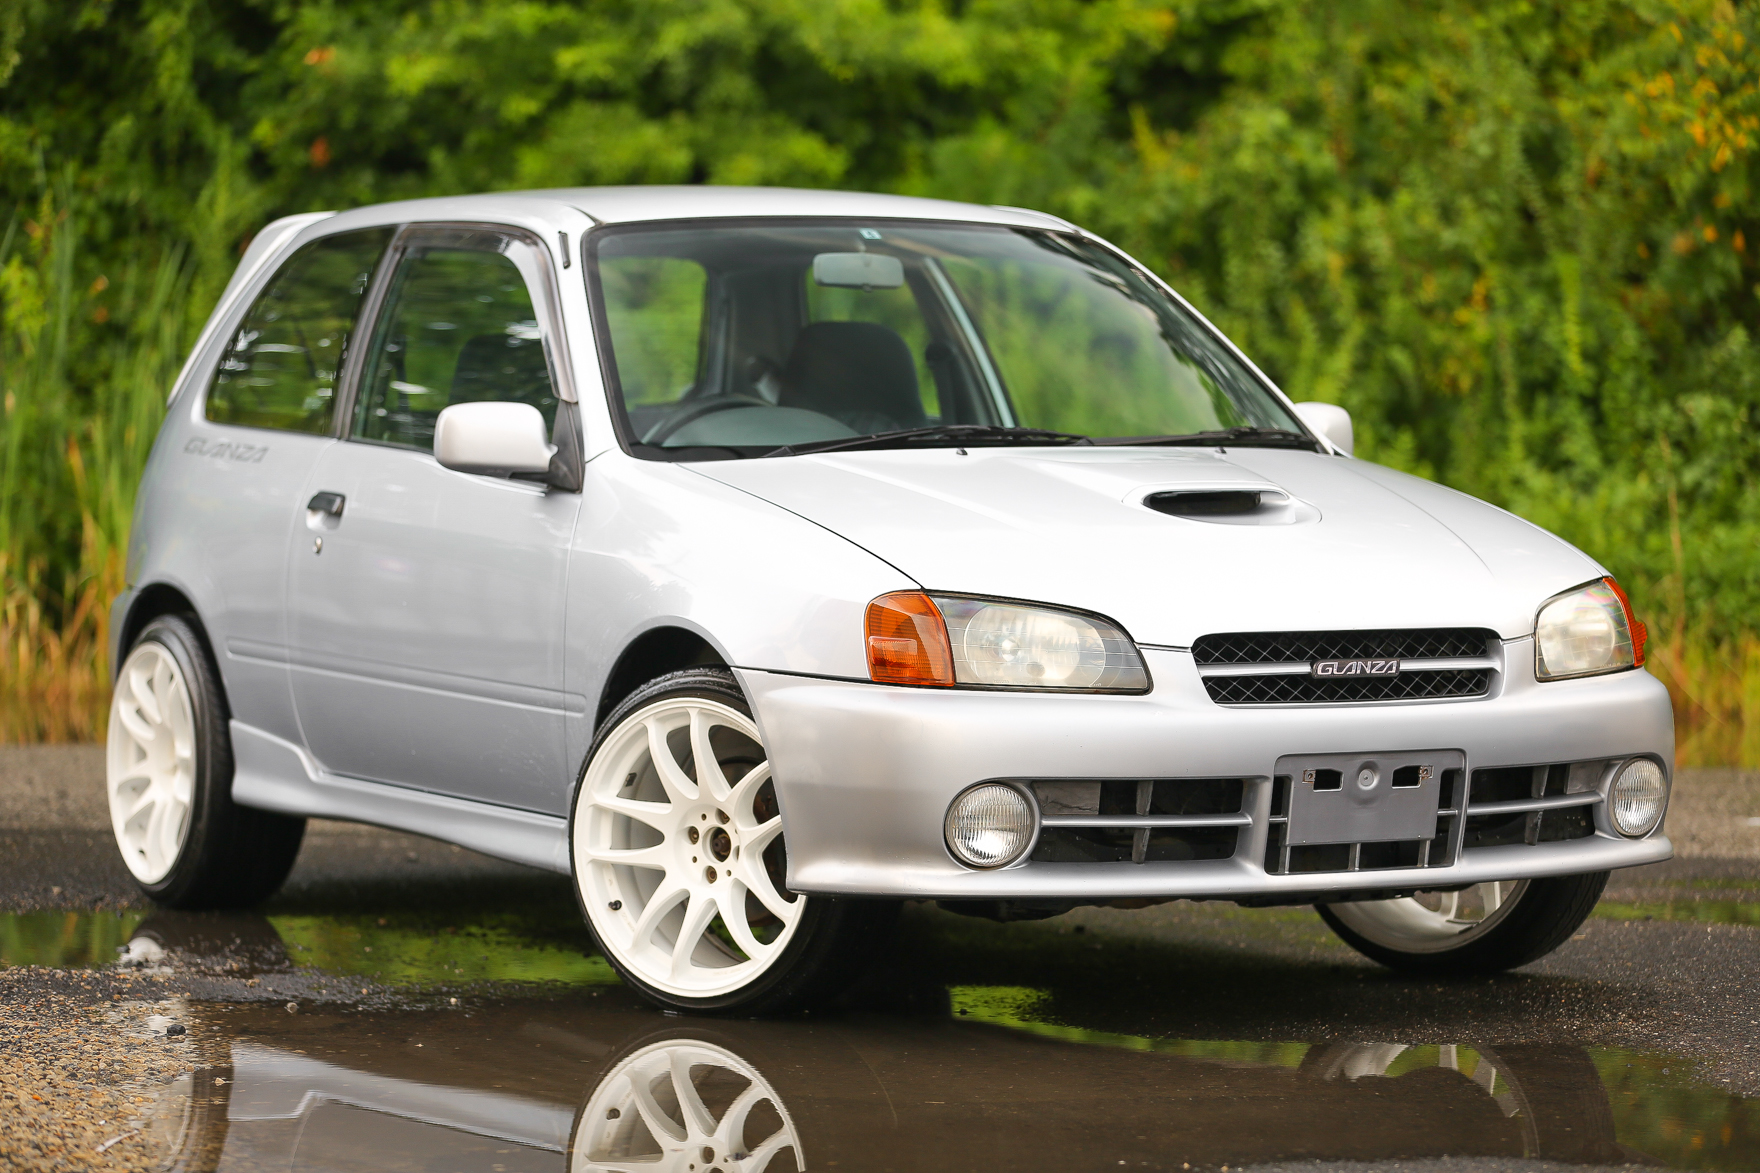 1996 Toyota Starlet Turbo - Available for $13,990